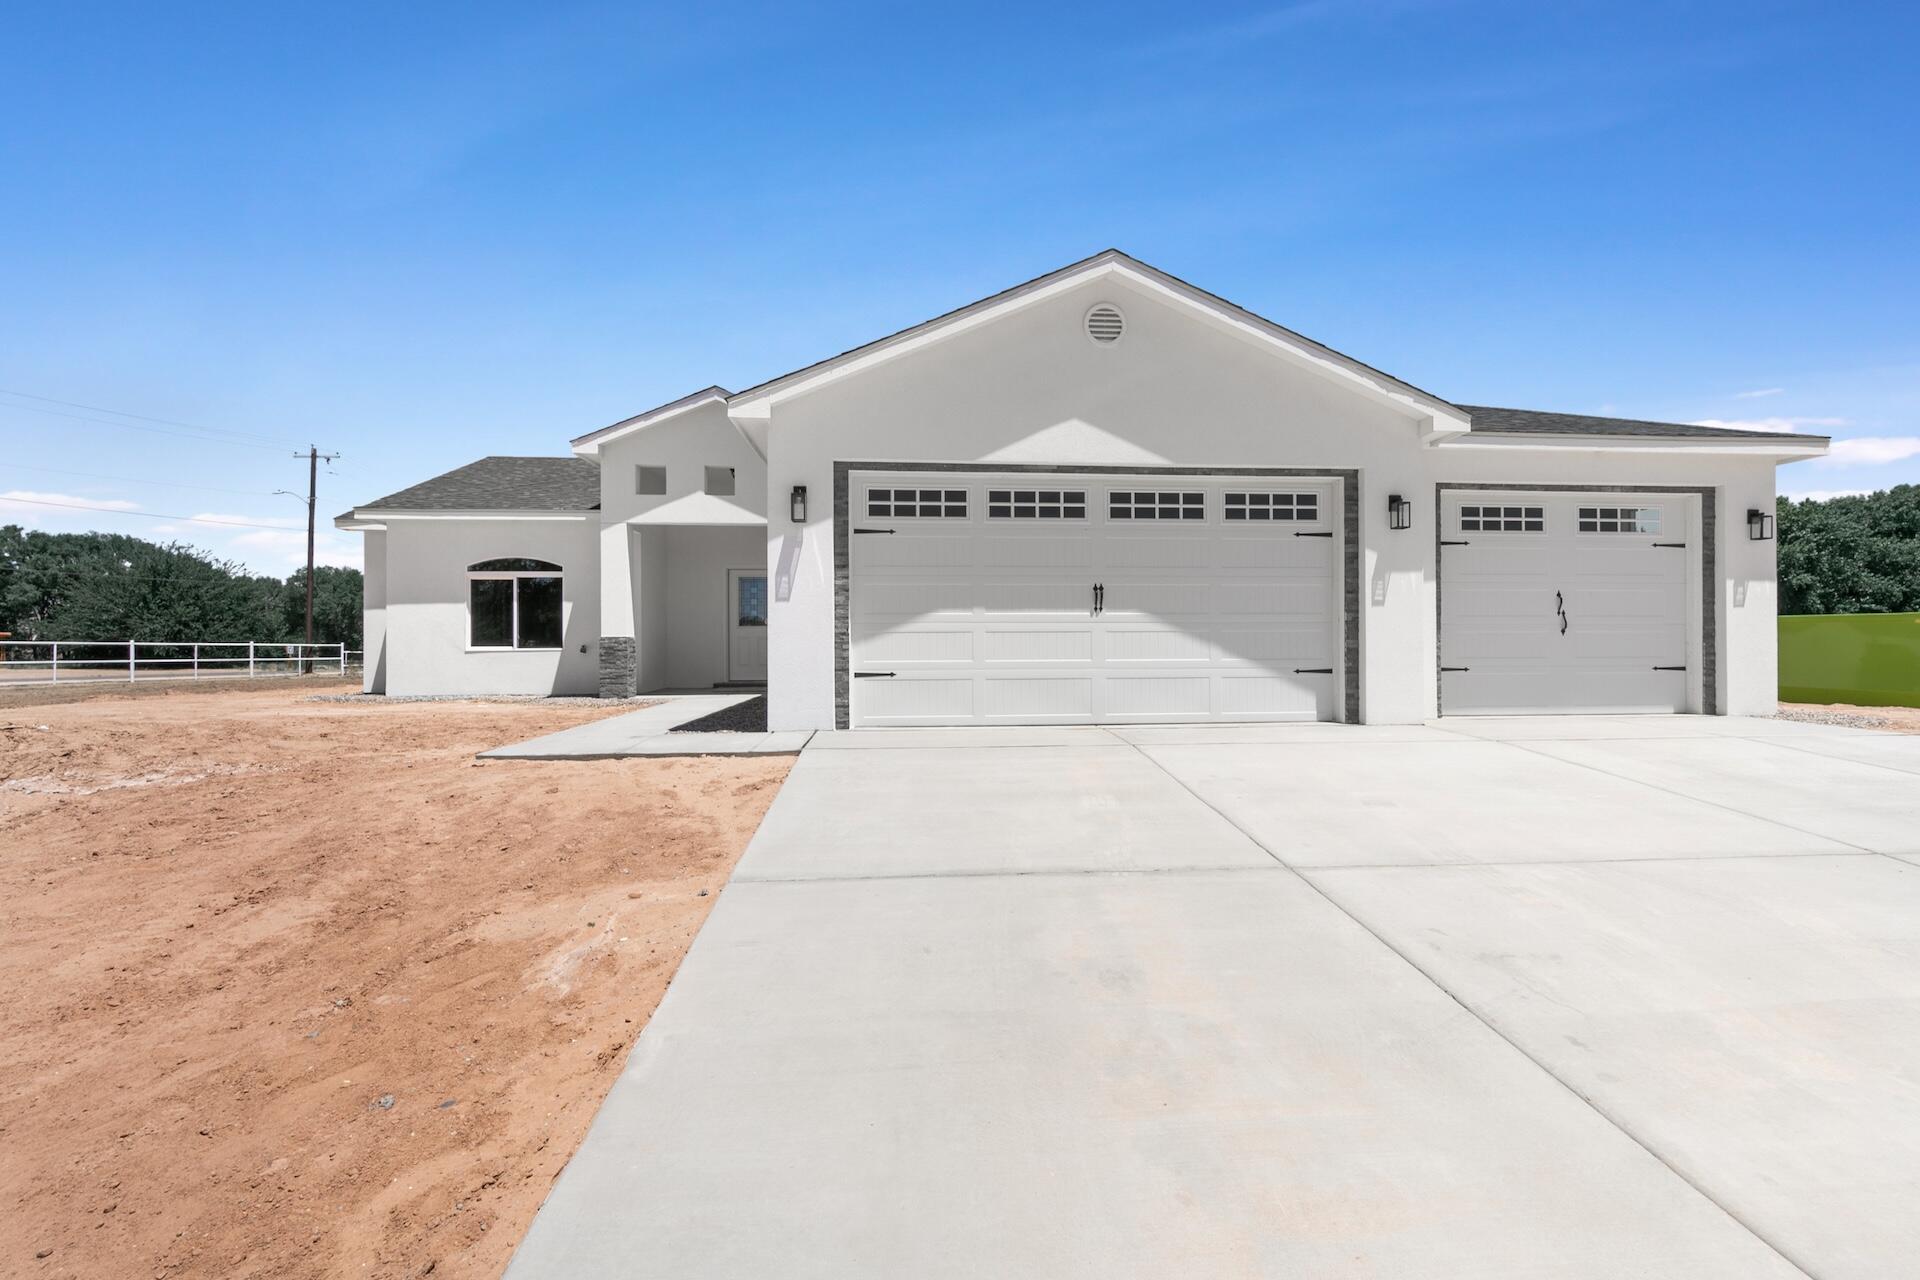 New construction home conveniently located in the heart of Los Lunas. Situated on one acre and built with quality craftmanship, this home has many features that are sure to meet your needs and wants in your next home! You will enjoy cooking in a nice open kitchen with granite and an abundant amount of counter top space and cabinetry, plus a sizable pantry. Living area is spacious, bright and full of light. The generously sized primary bedroom includes a divine en suite bathroom.Proposed construction - Pictures are from a previous build. Colors and features are subject to change